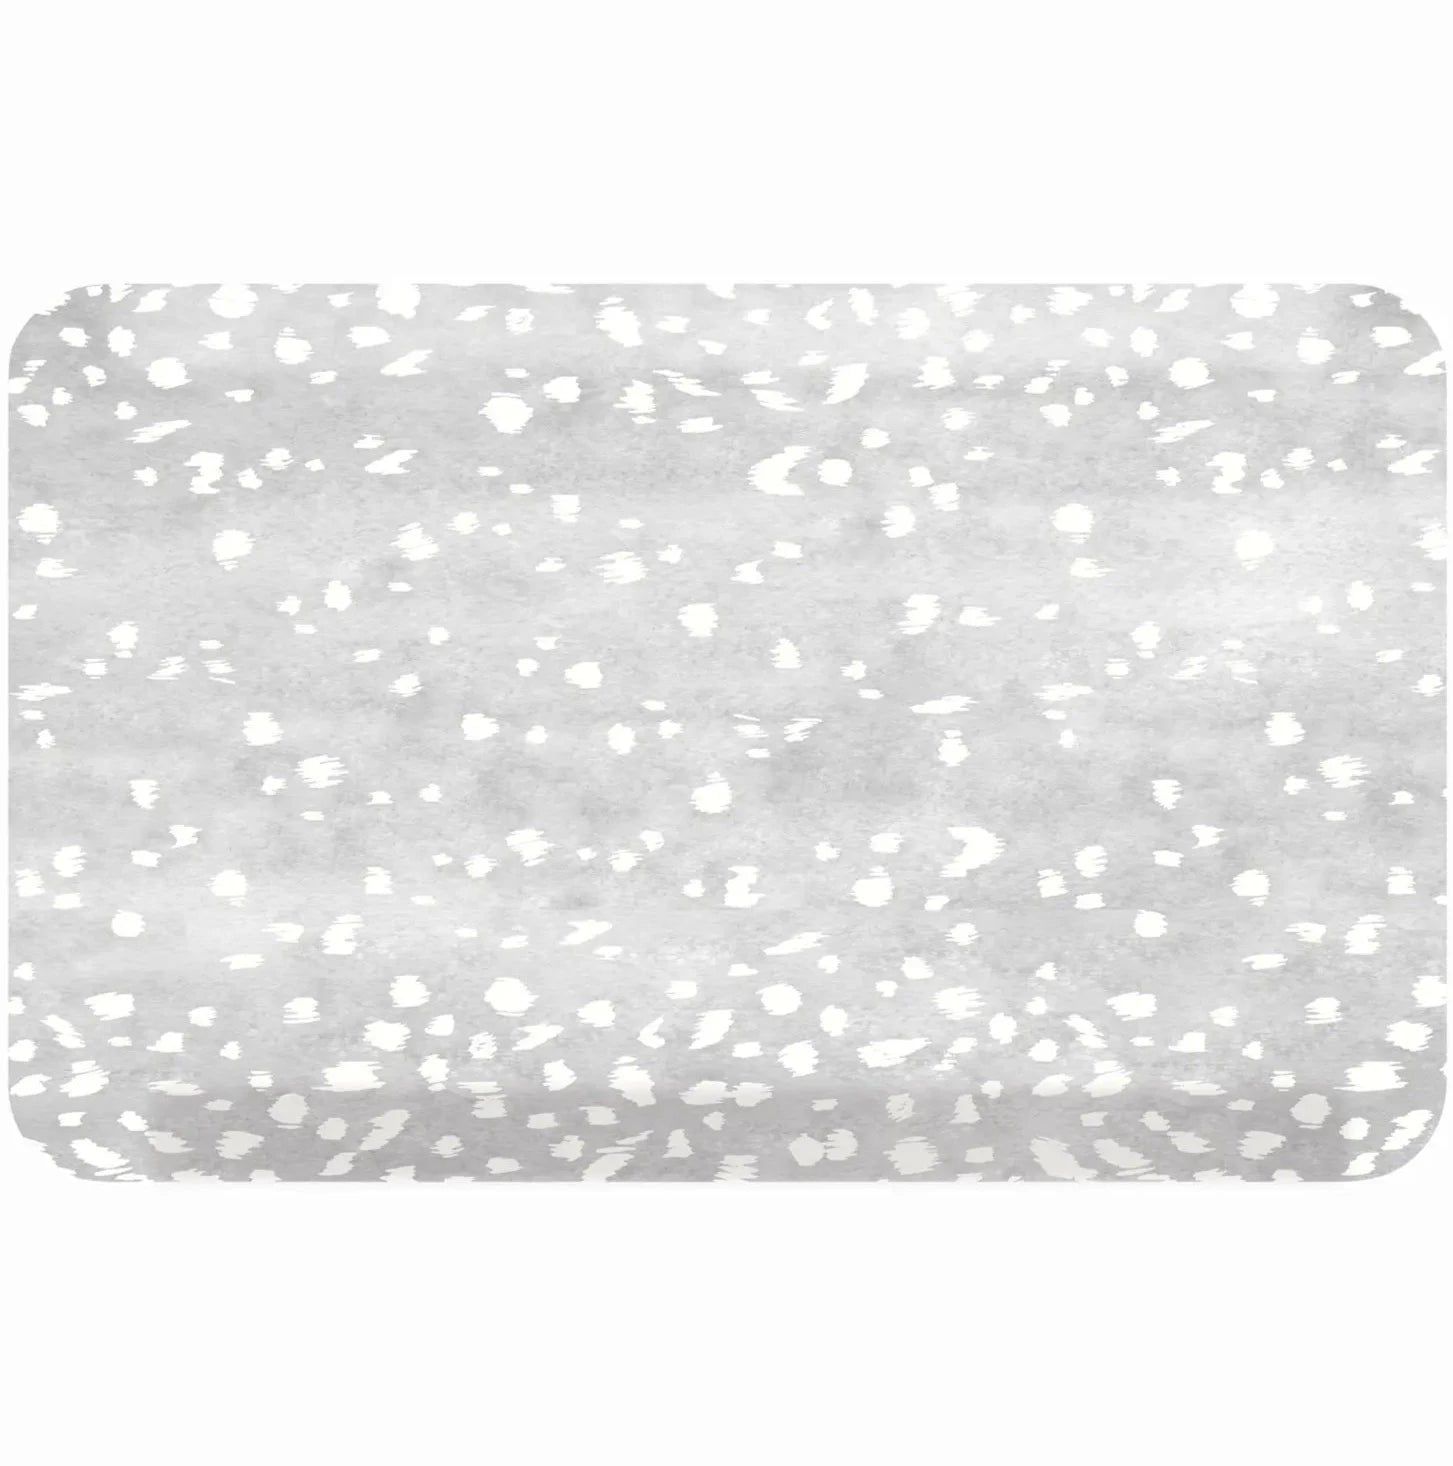 Nama Standing Mat | Fawn | House of Noa (formerly Little Nomad)